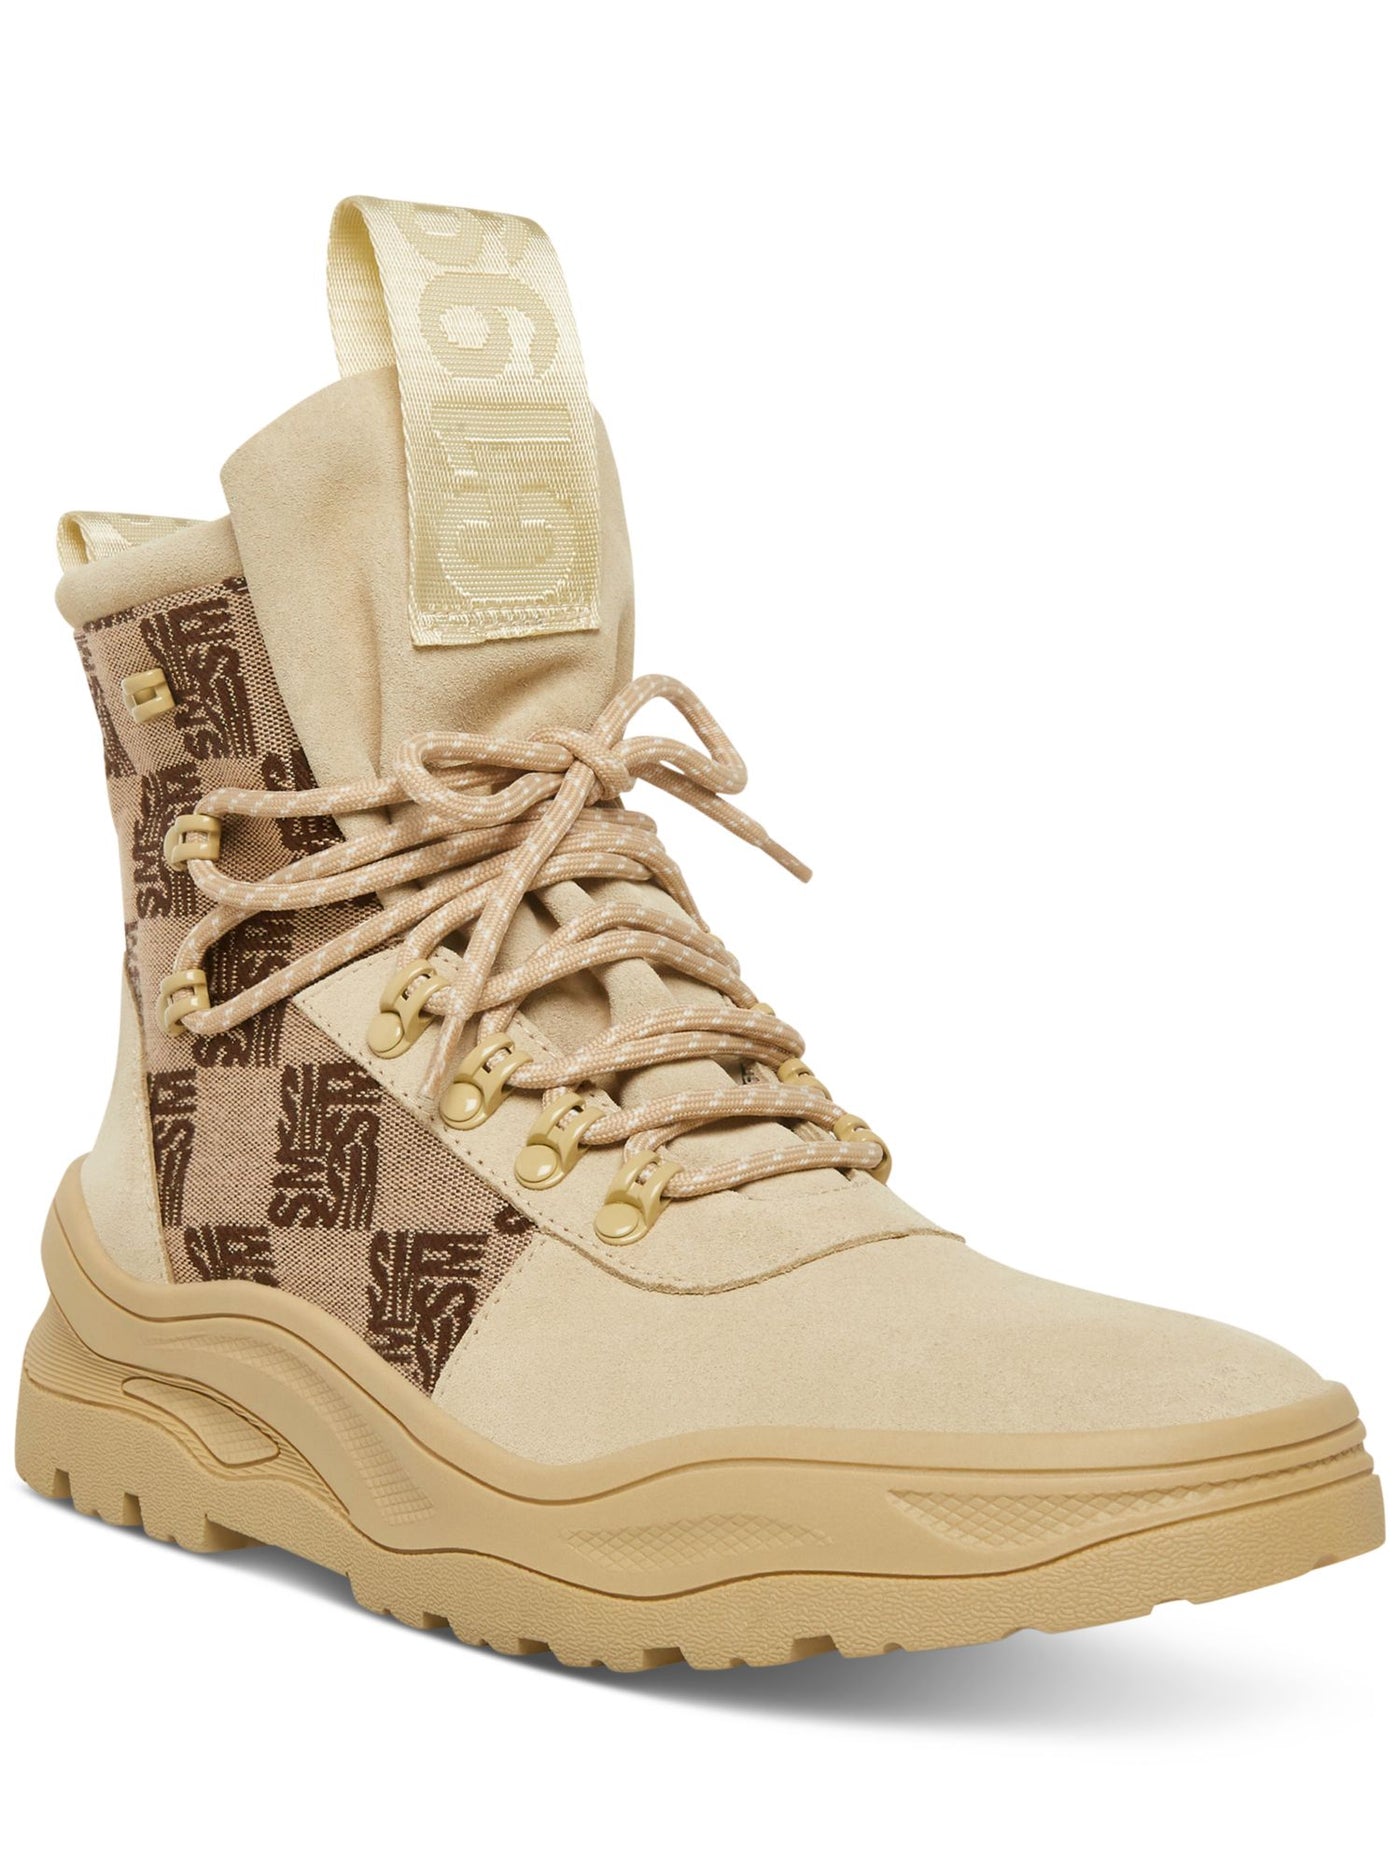 STEVE MADDEN Mens Beige Mixed Media Tongue And Heel Pull-Tabs Lug Sole Padded Mulberry Round Toe Wedge Lace-Up Combat Boots 13 M